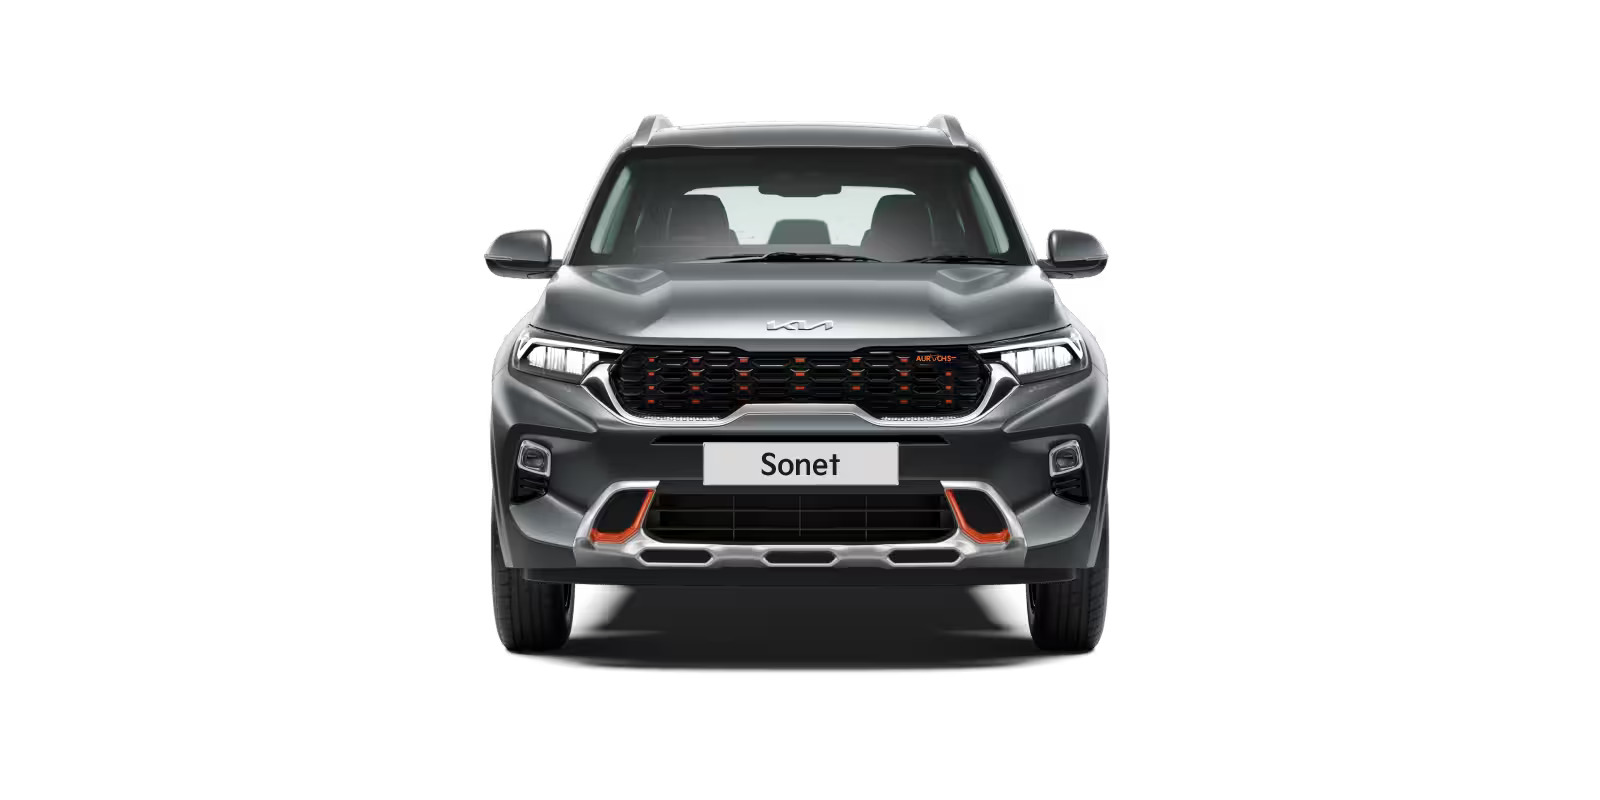 New Kia Sonet Aurochs Edition Launched in India at Rs 11.85 lakhs - foreground